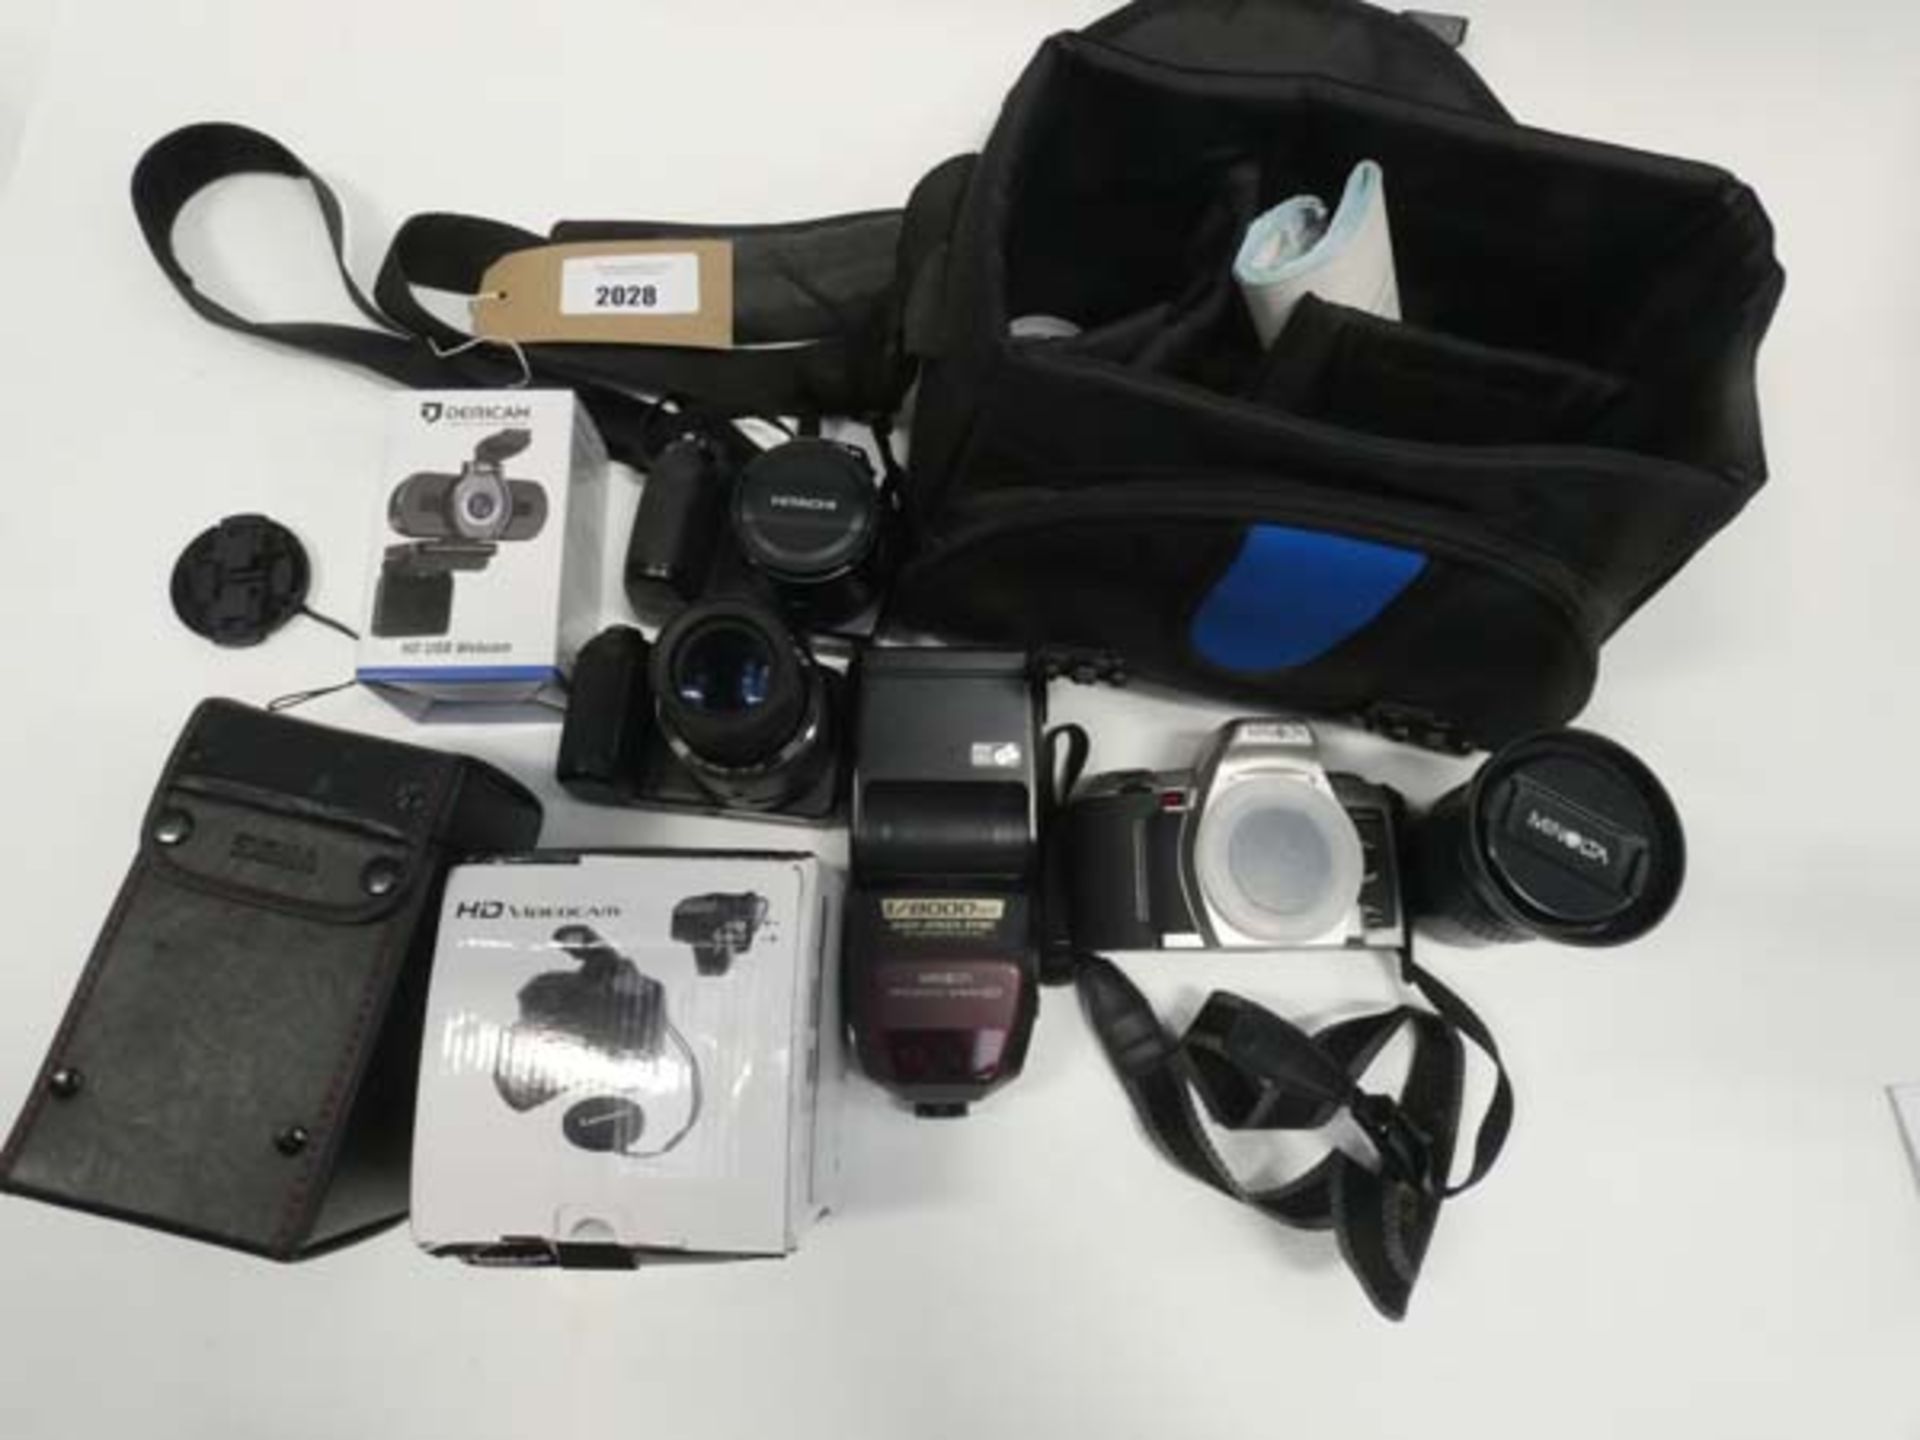 Bag containing various cameras/camera accessories; Minolta 505si Super with accessories and others